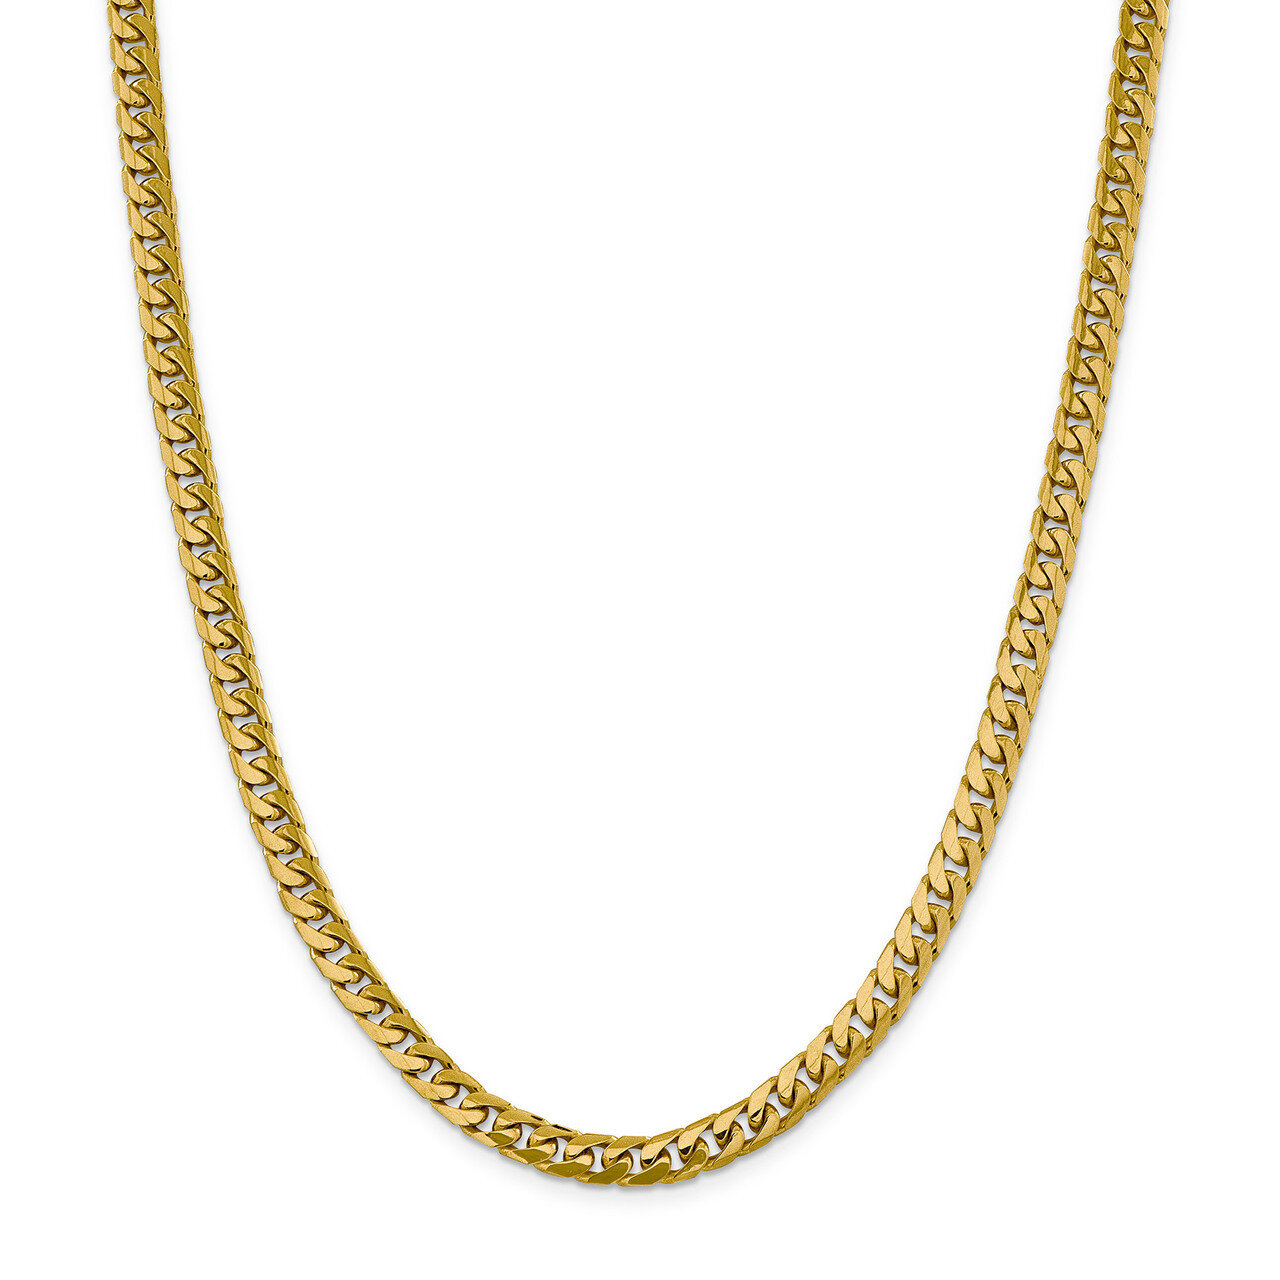 22 Inch 6.25mm Domed Curb Chain 14k Gold DCU200-22